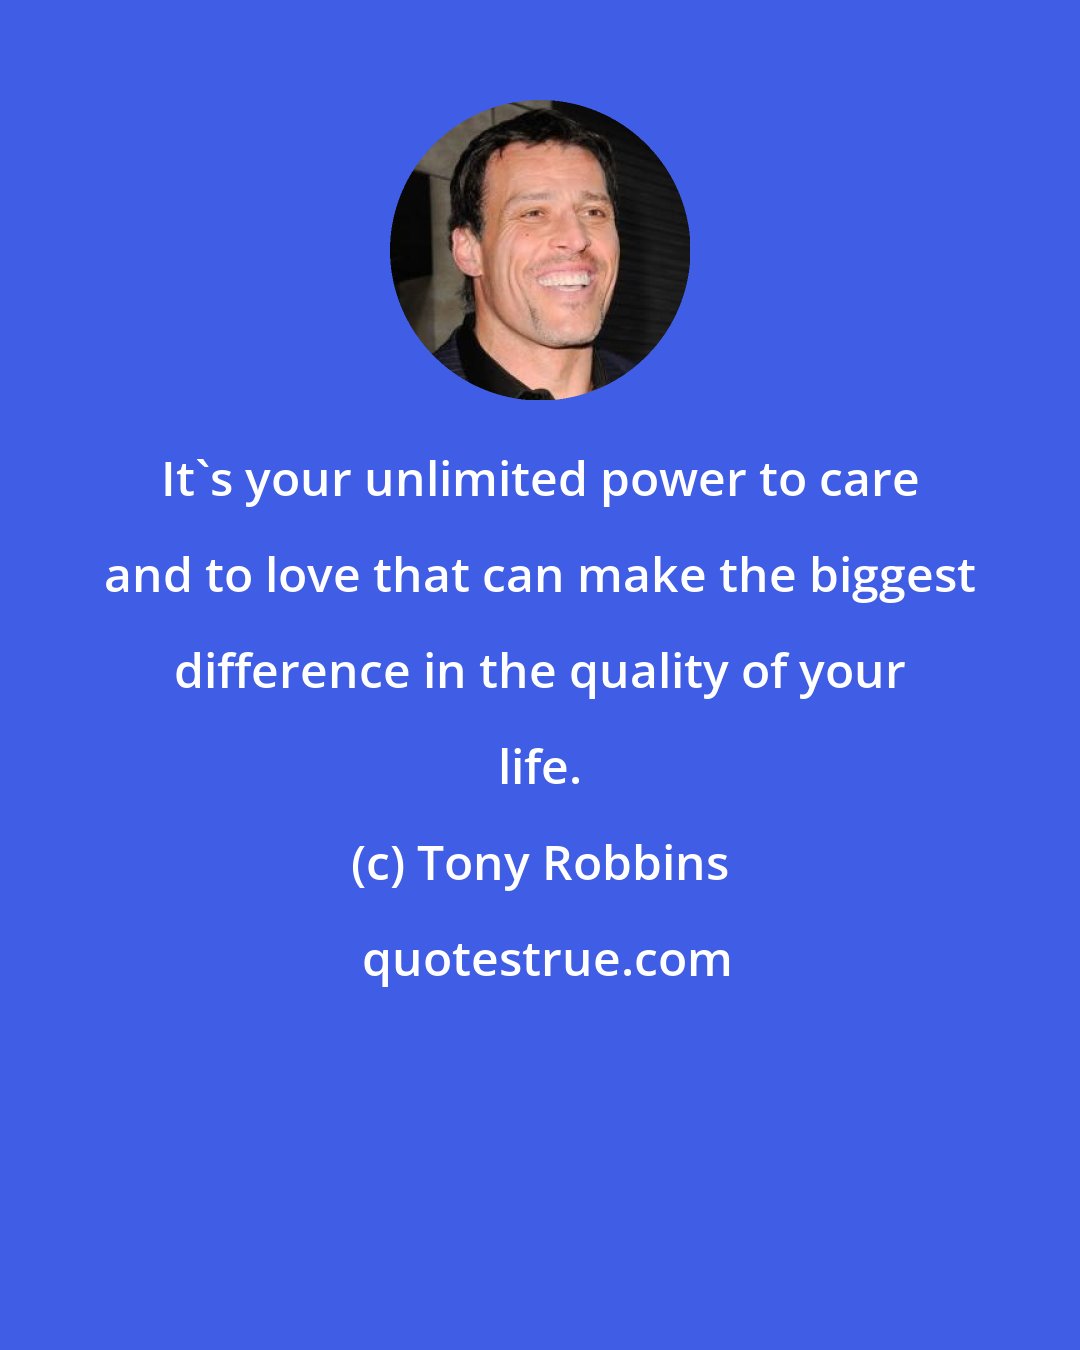 Tony Robbins: It's your unlimited power to care and to love that can make the biggest difference in the quality of your life.